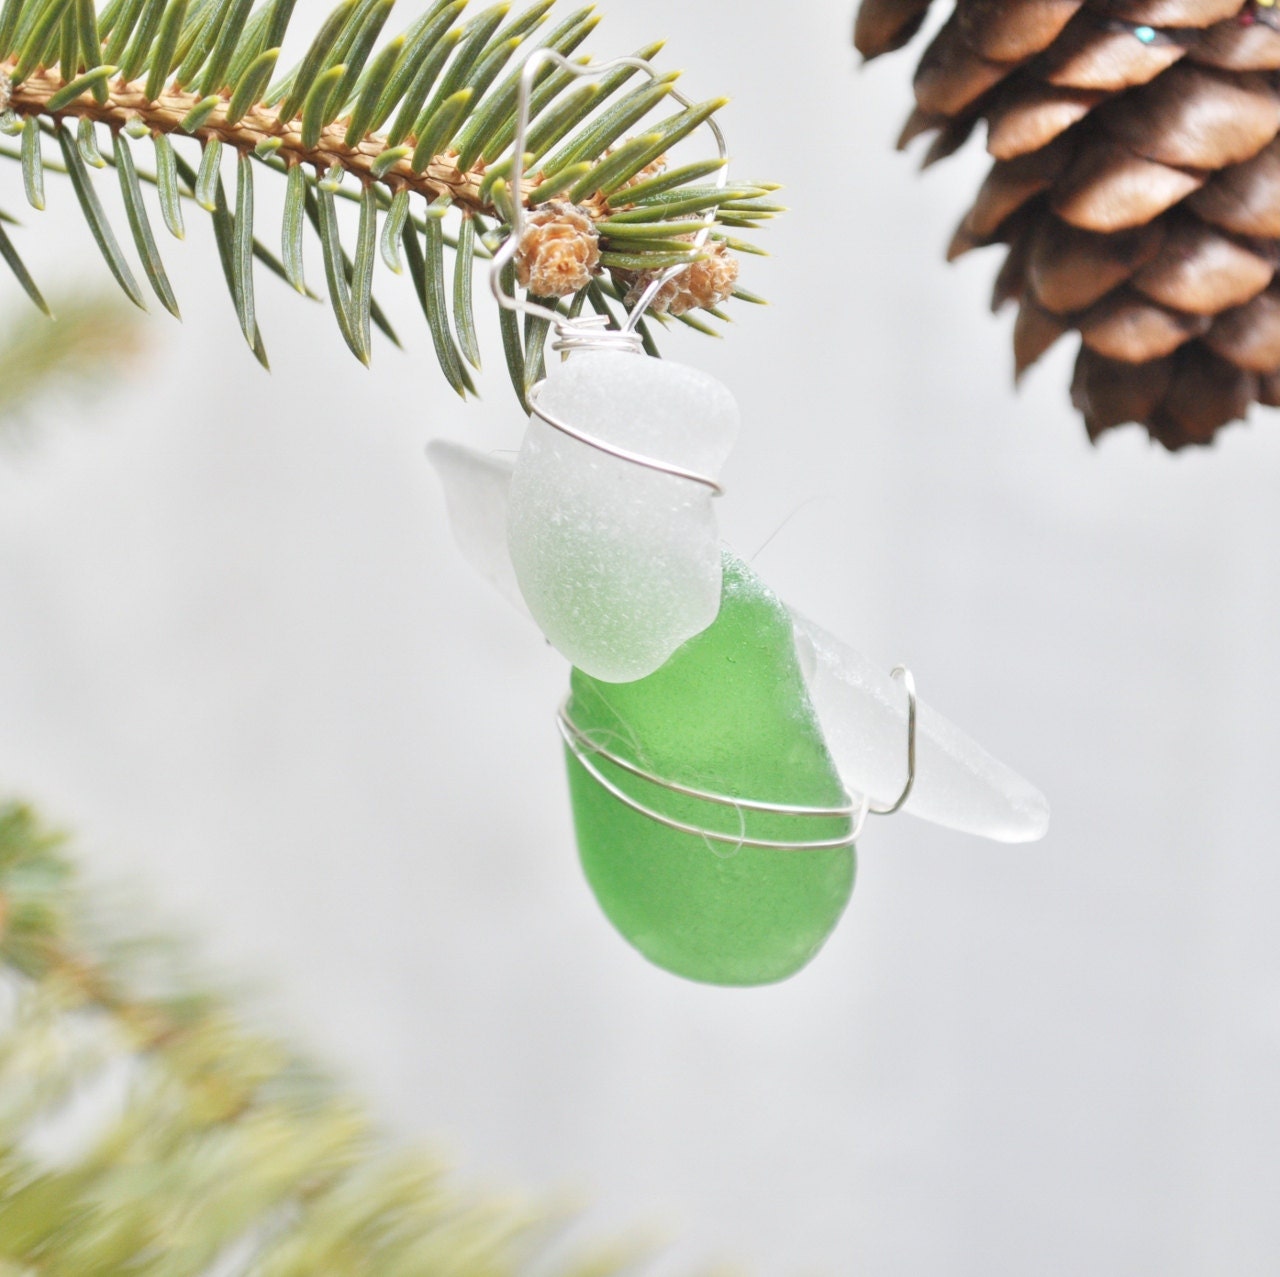 Seaglass Angel Christmas Ornament or Sun-catcher made with Green and White Seaglass - ShatteredSmooth